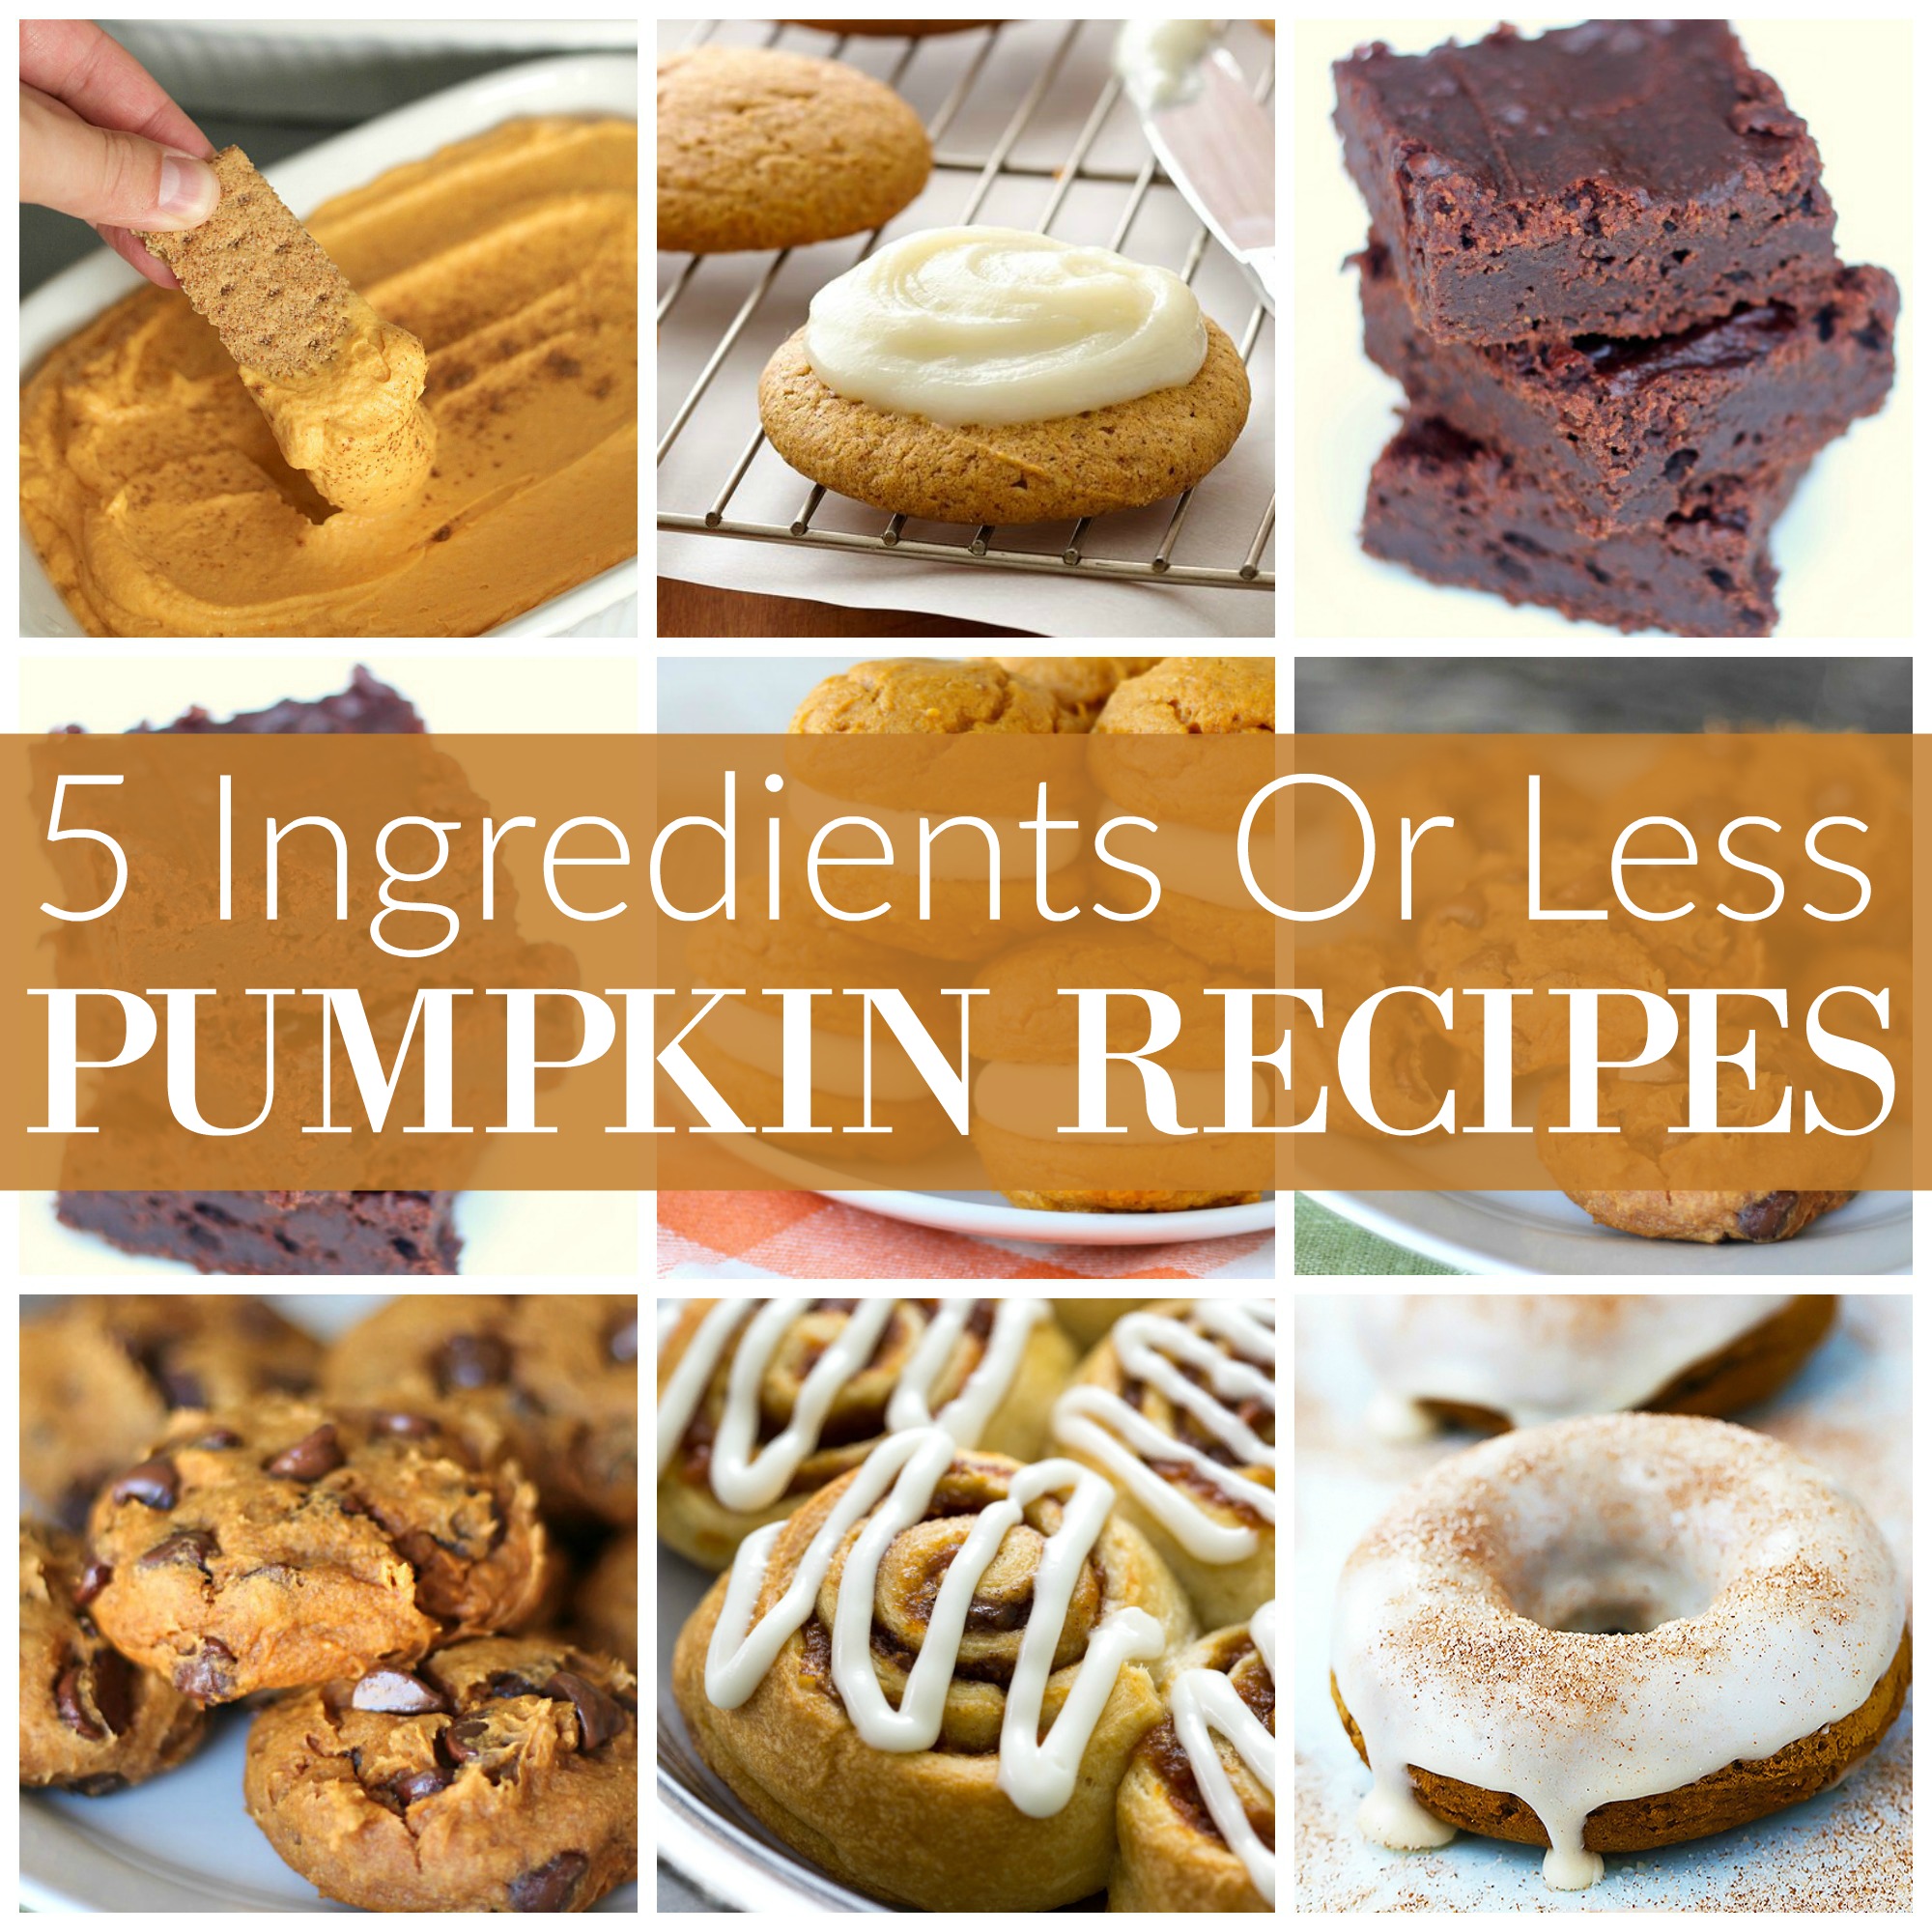 Delicious Pumpkin Recipes that are 5 Ingredients or Less